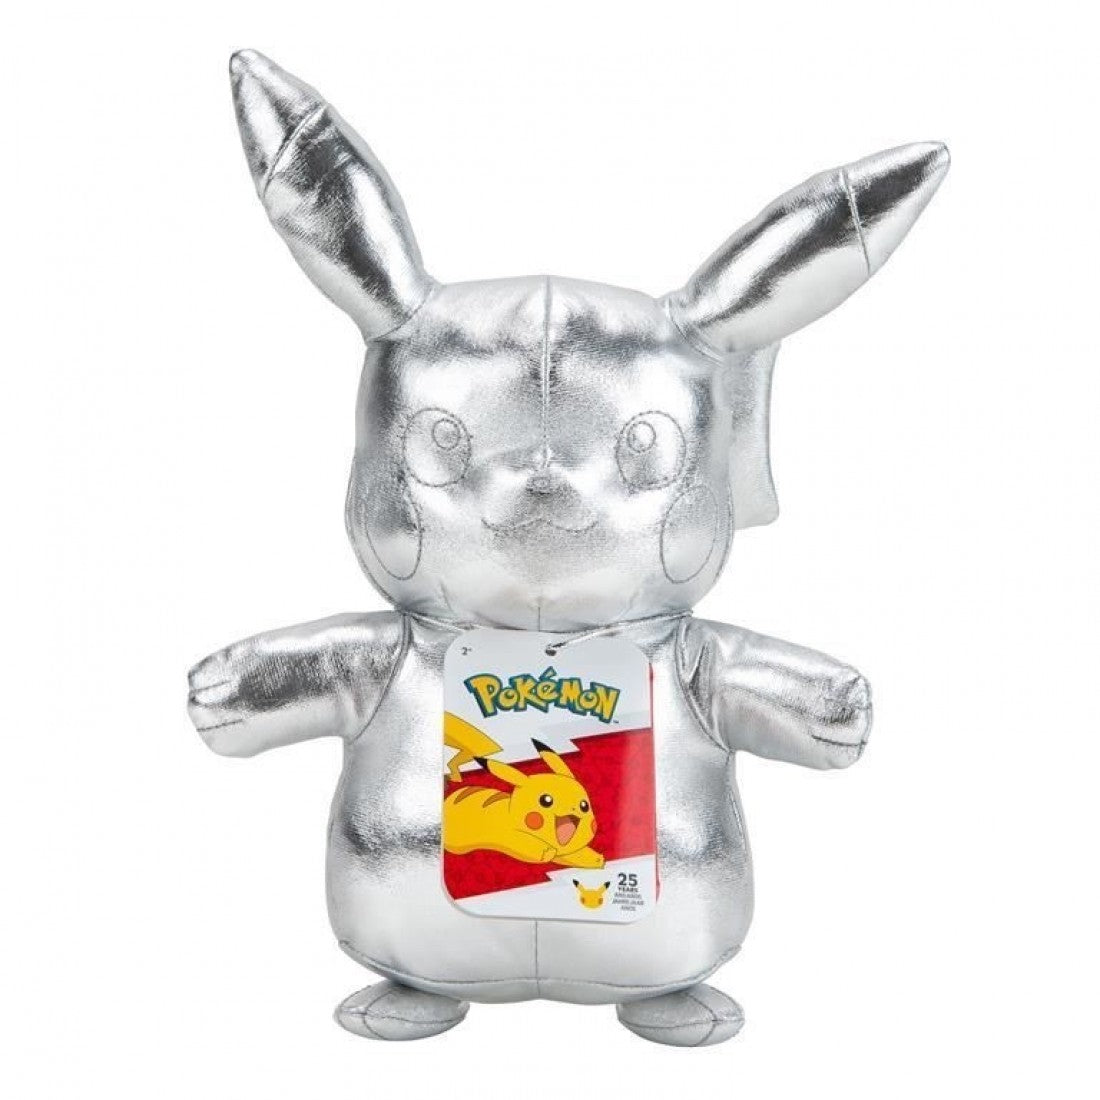 *Reduced to clear* POKÉMON 25TH CELEBRATION 8INCH - SILVER